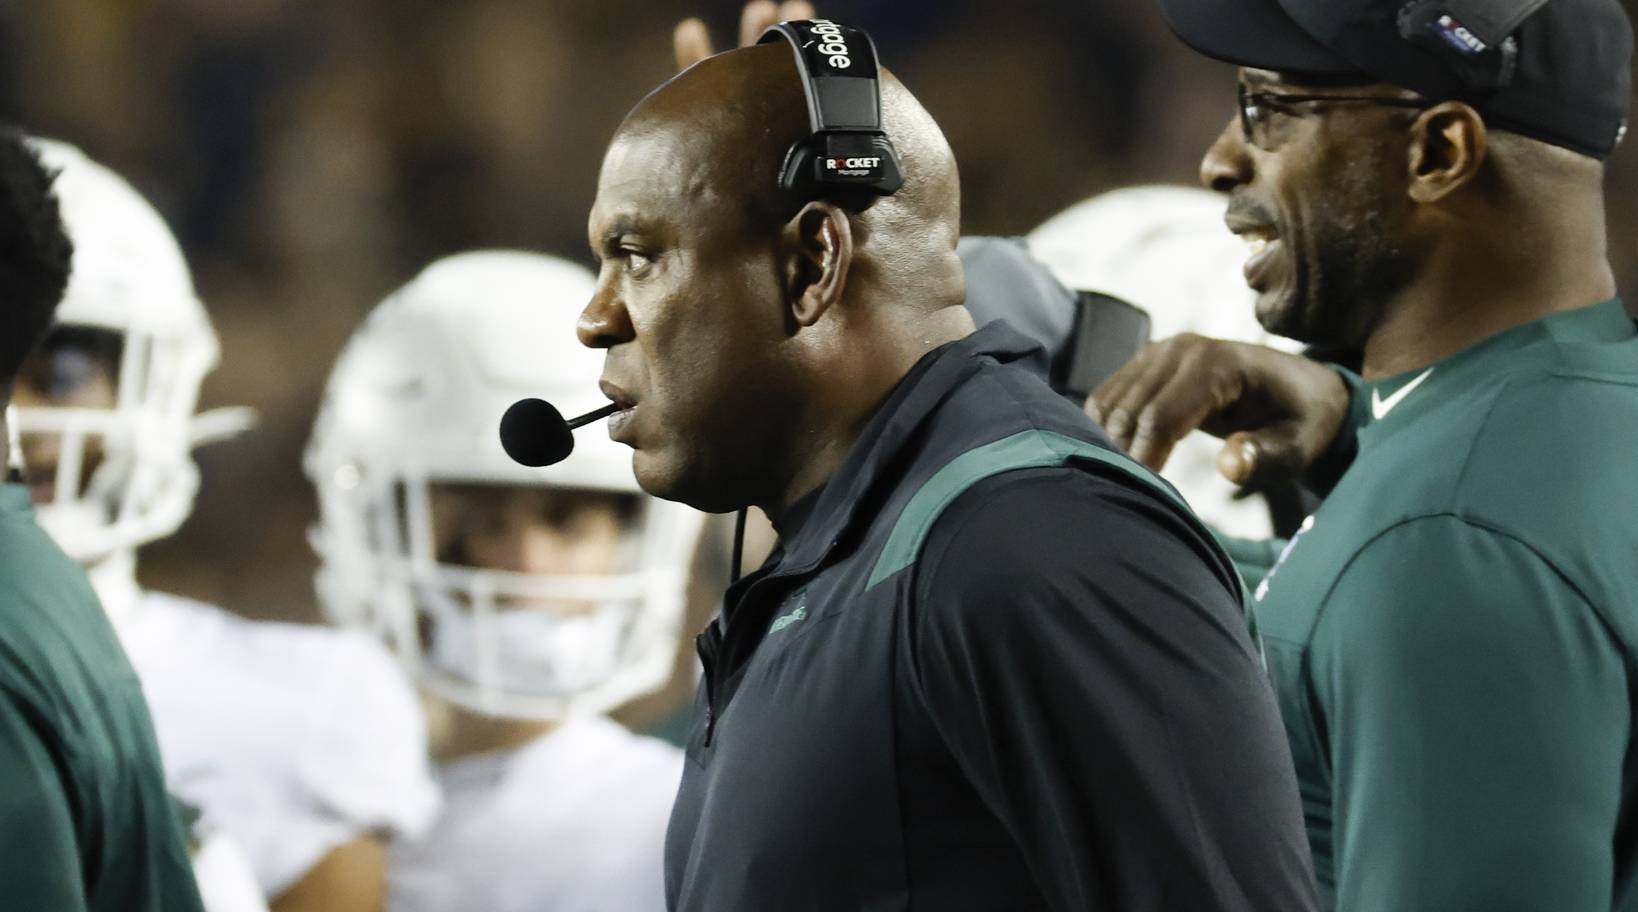 Video Shows Michigan State’s Mel Tucker In Altercation With Fan - Sports Illustrated